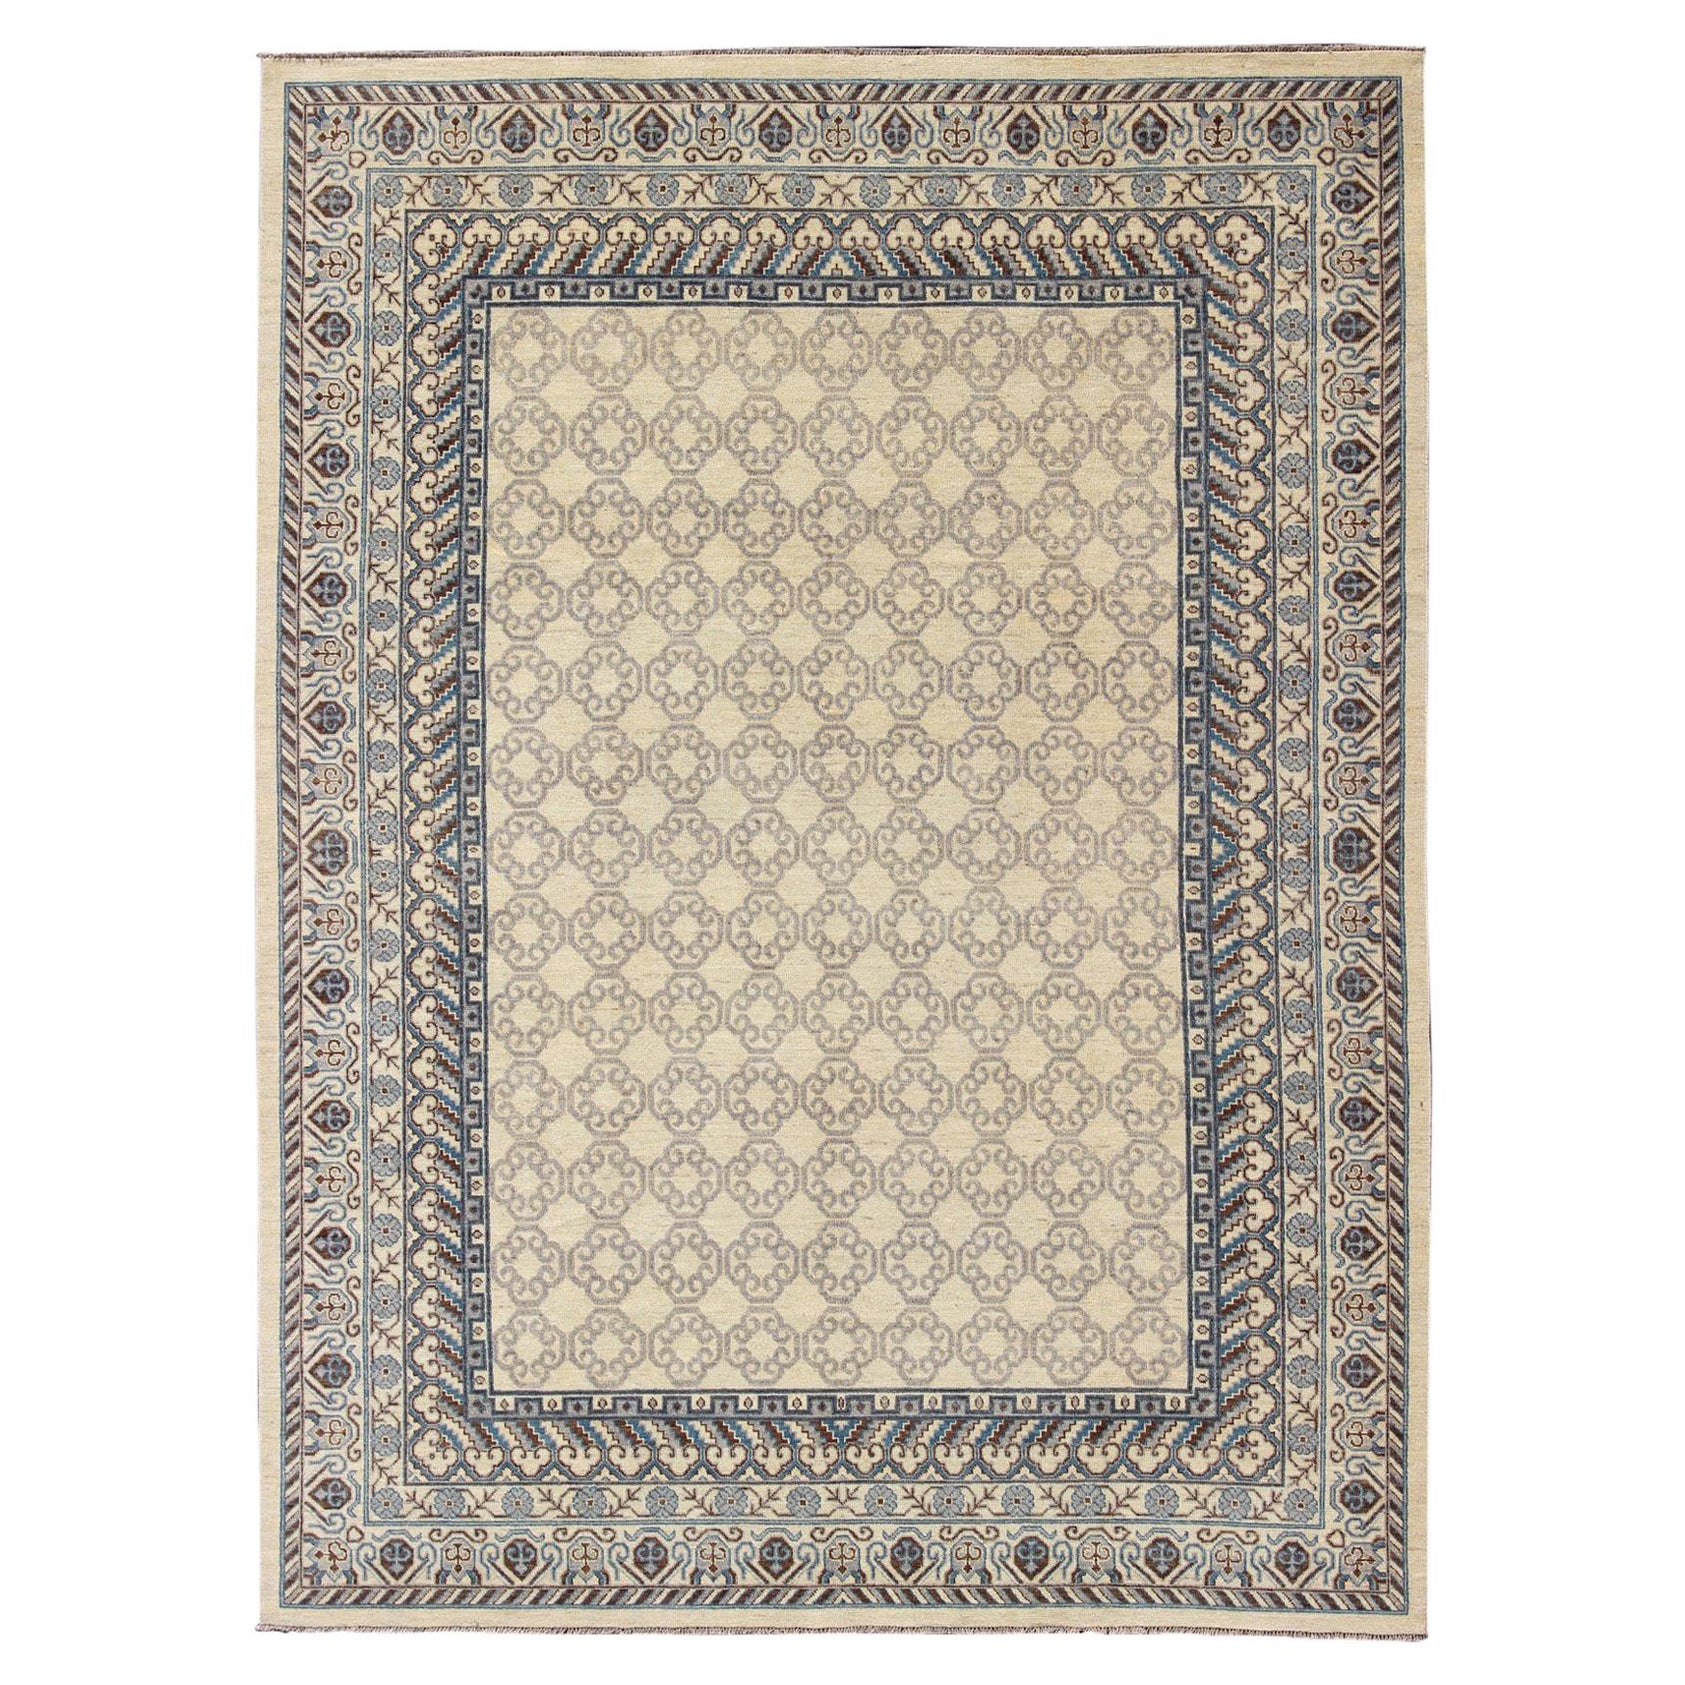 Contemporary Khotan with Geometric Design in Blue, Brown & Cream Colors